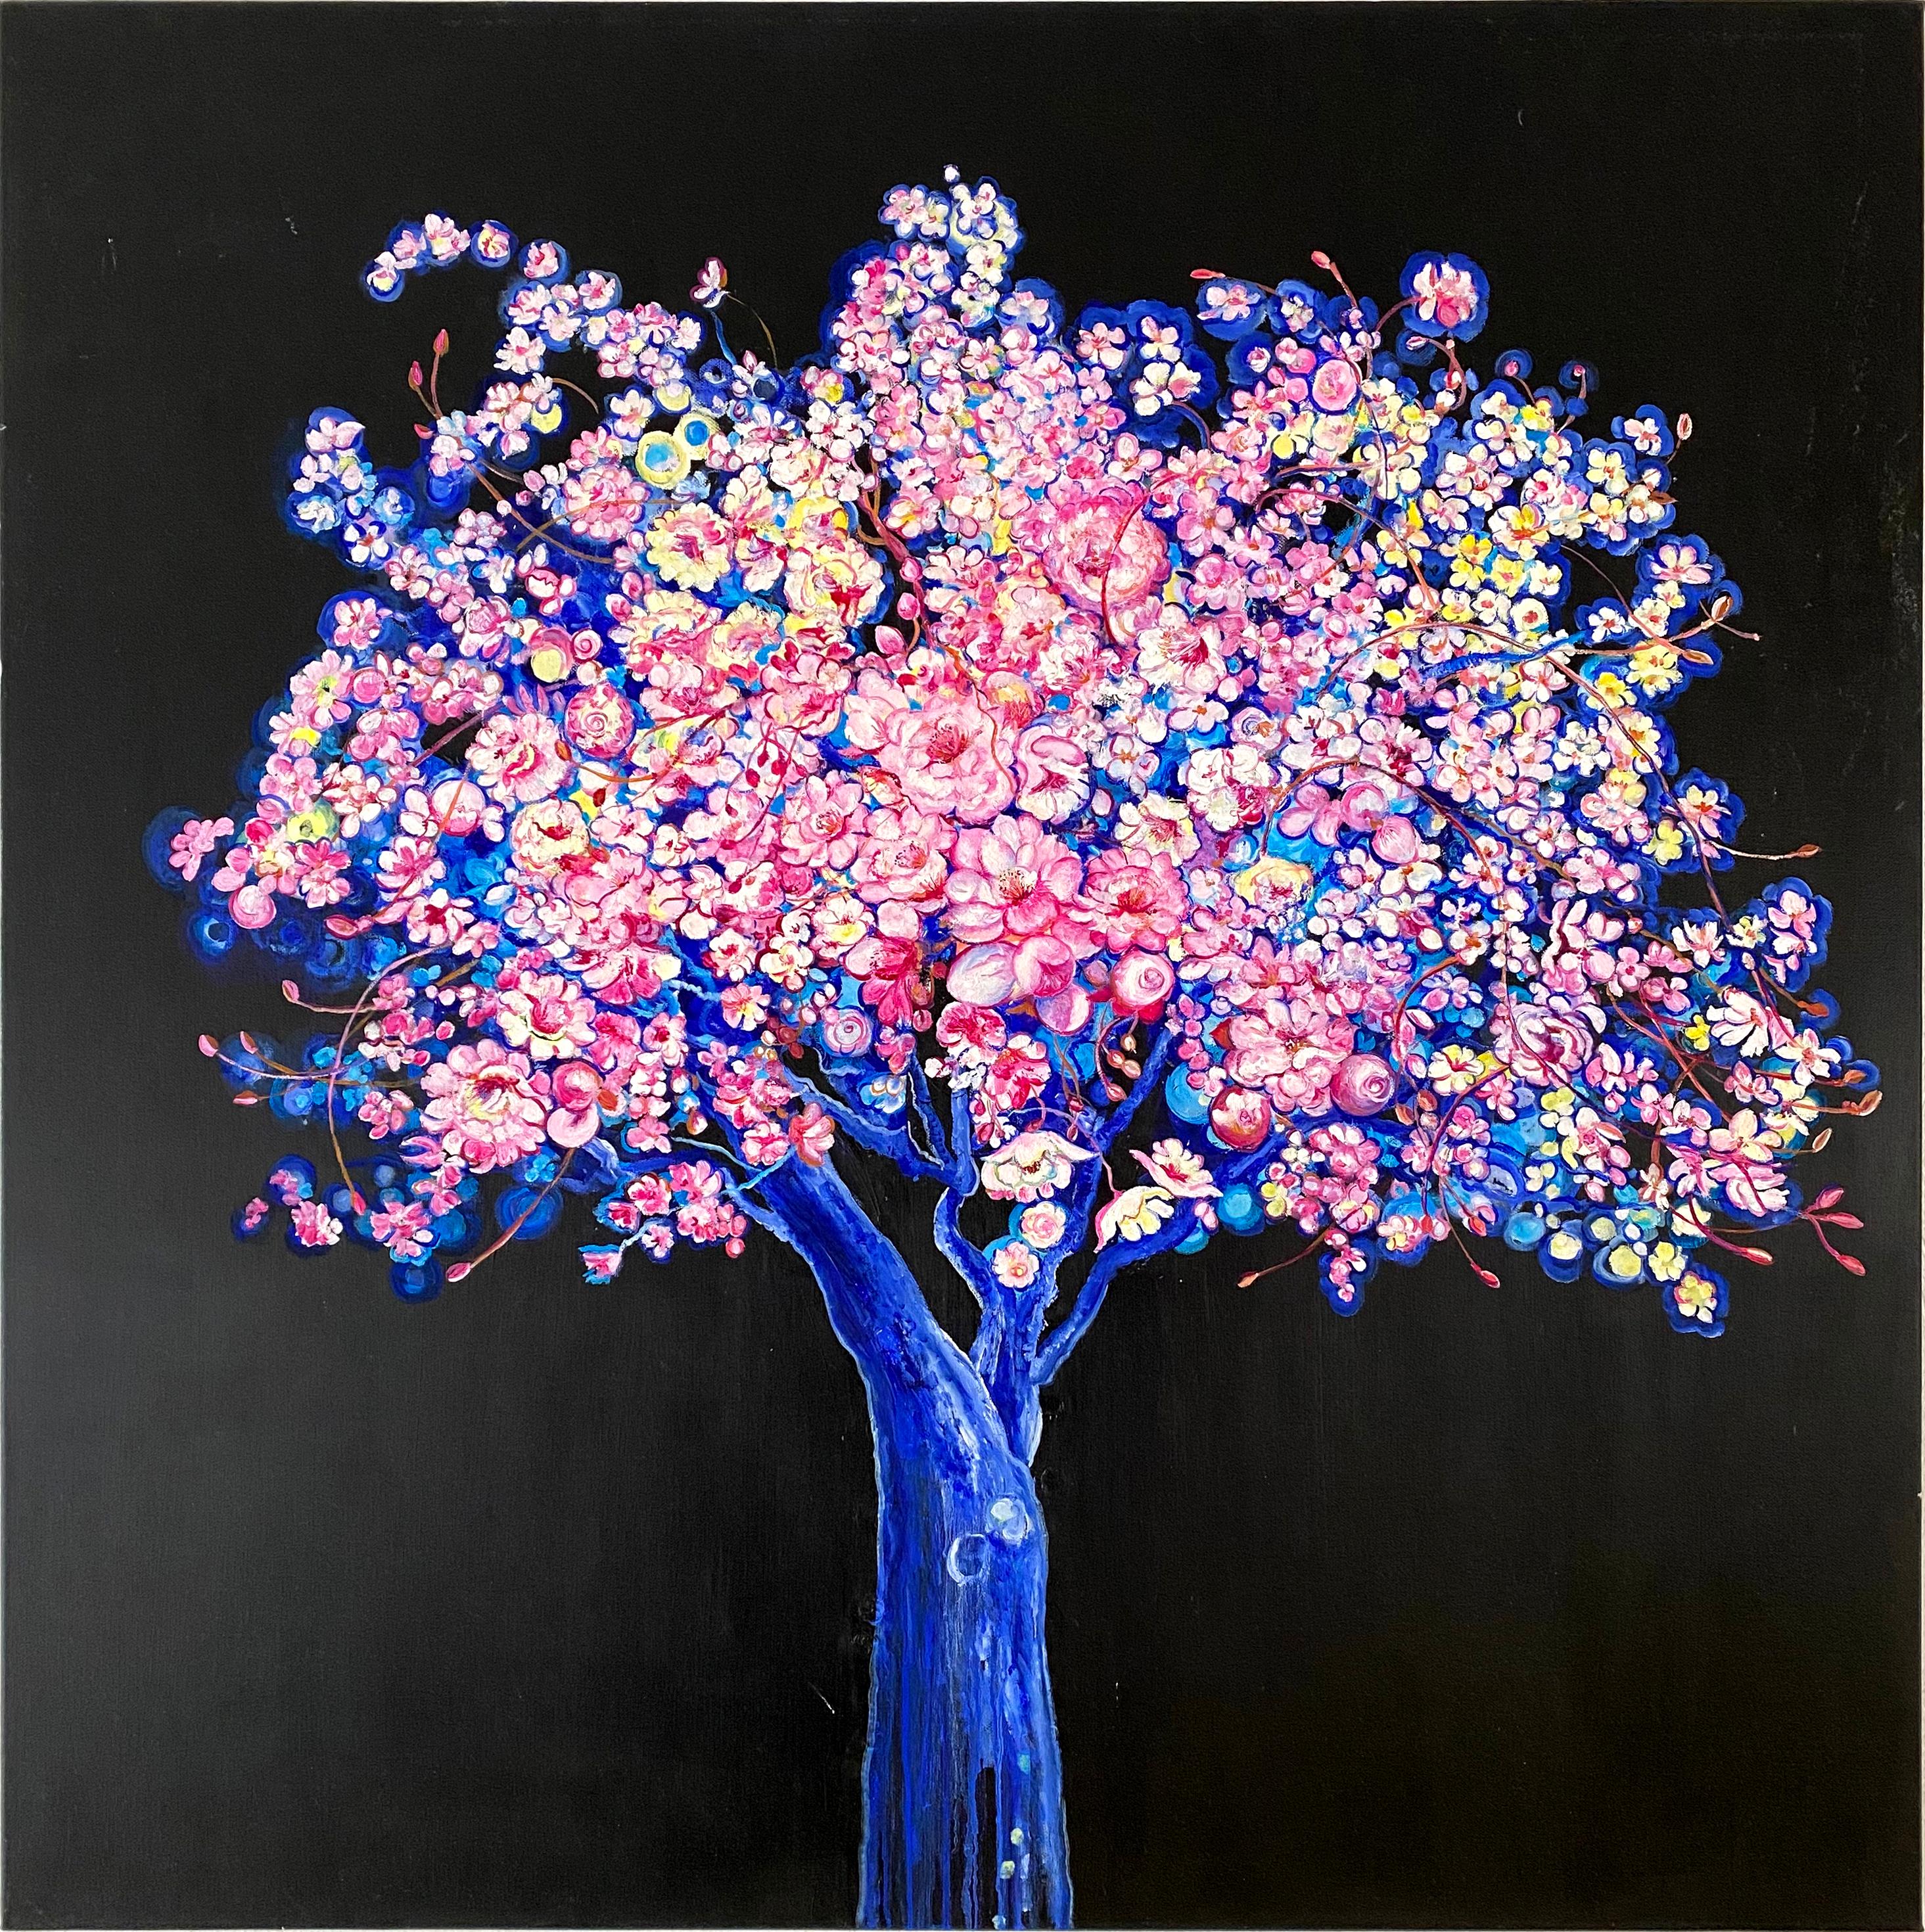 Anastasia Gklava Landscape Painting - "Blue Moon Tree", Bright and colorful painting with blossoming flowers and tree